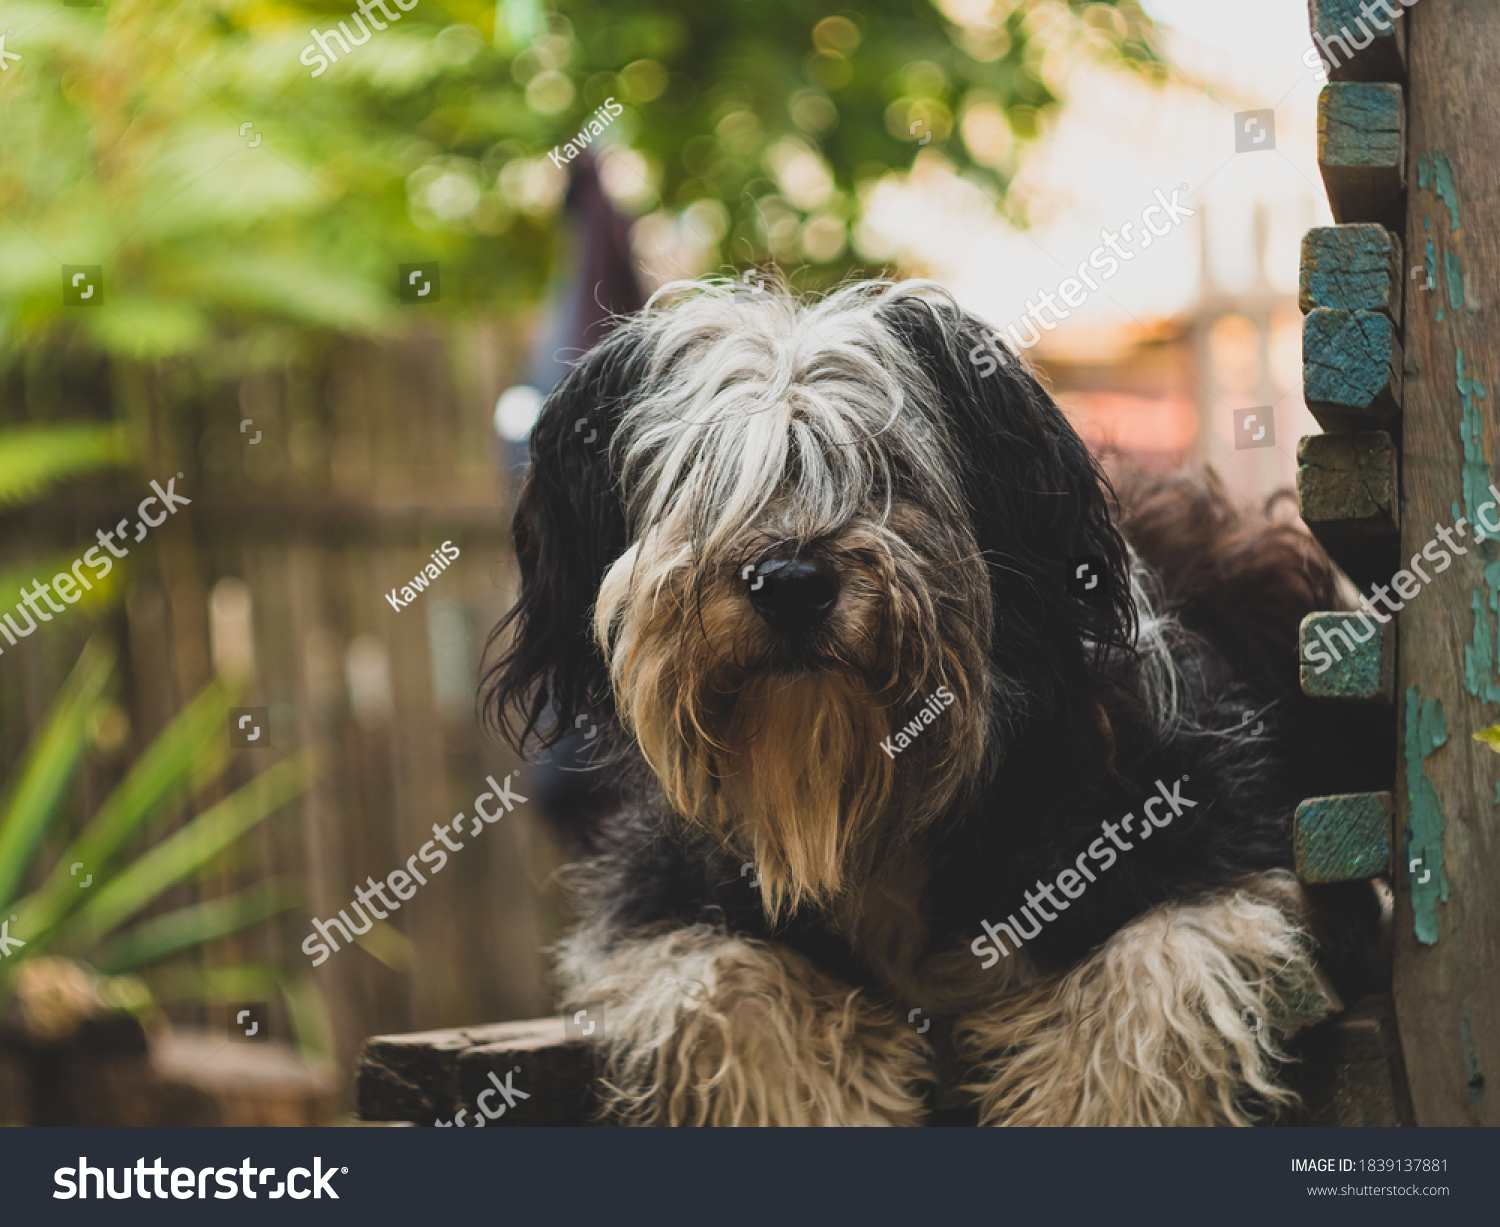 Polish Lowland Sheepdog sitting on wooden bench and showing pink tongue. Selective focus on a nose. Portrait of cute big black and white fluffy long wool thick-coated dog. Funny pet animals background #1839137881